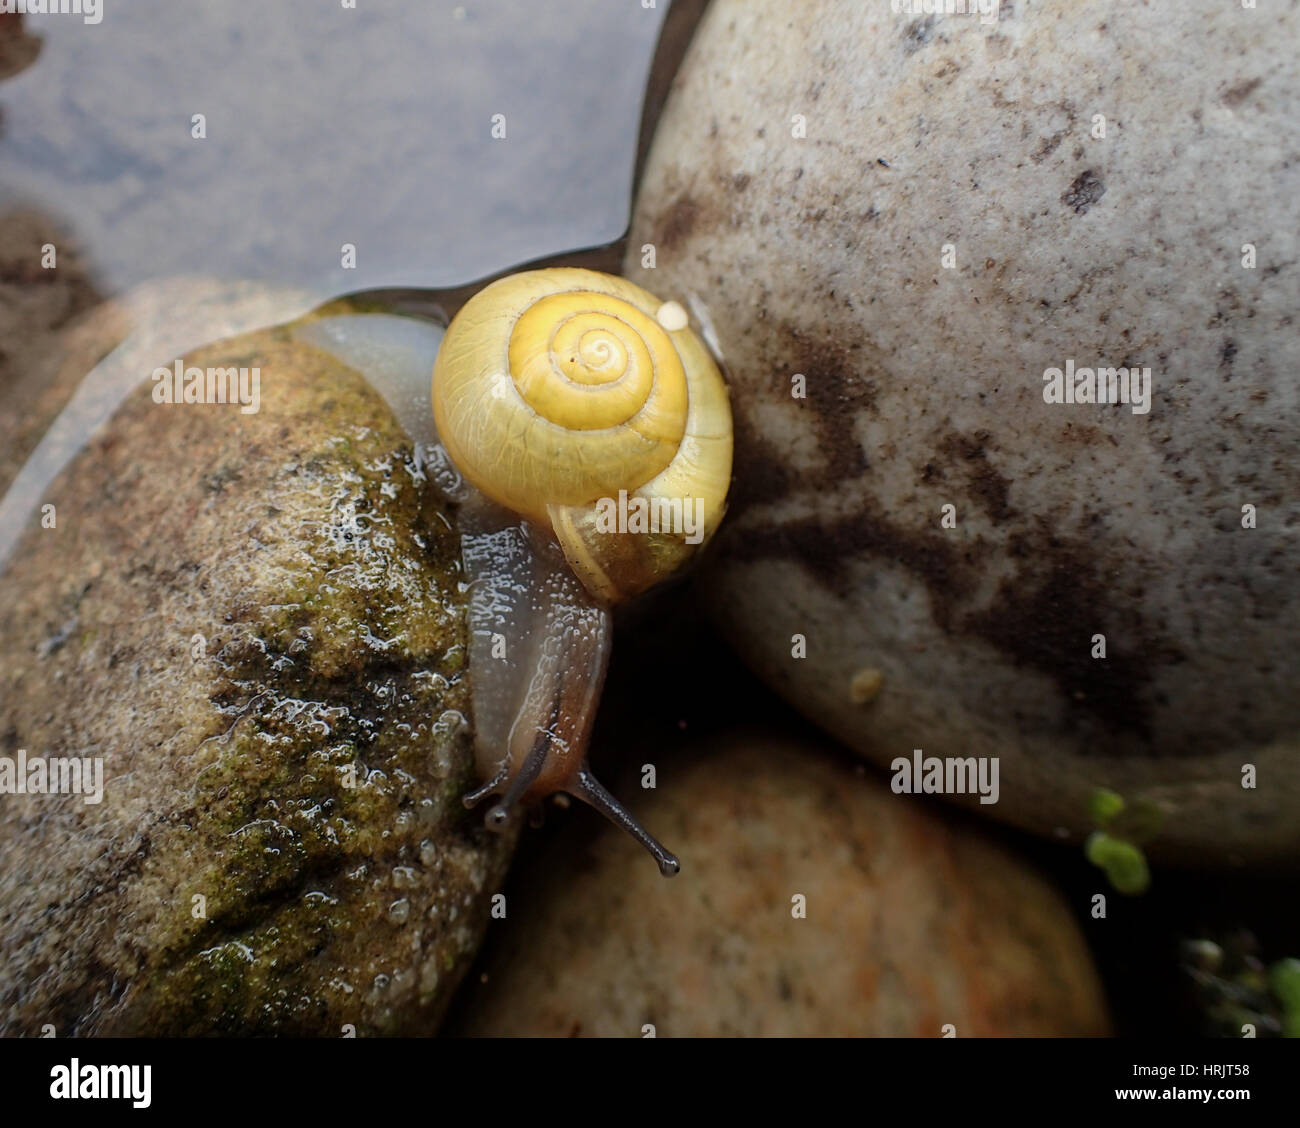 A yellow-shelled white-lipped snail (Cepaea hortensis) on a stone at the edge of a garden pond Stock Photo